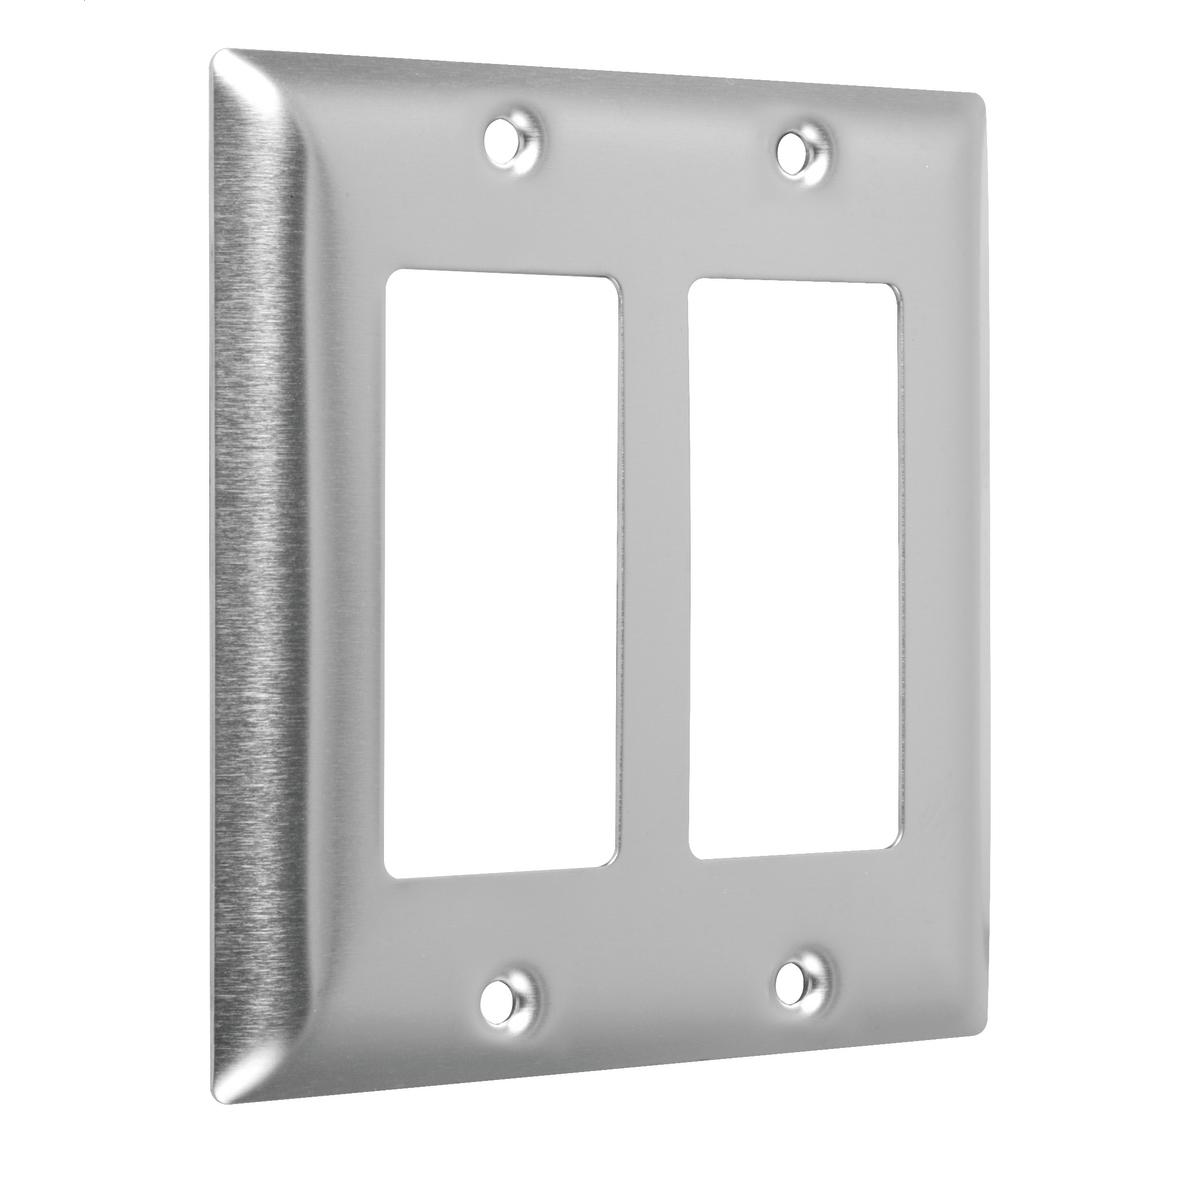 Hubbell WSS-RR 2-Gang Metal Wallplate, Standard, 2-Decorator, Stainless Steel  ; Easily primed and painted to match or complement walls. ; Won't bow, crack or distort during installation. ; Premium North American powder coat. ; Includes screw(s) in matching finish.